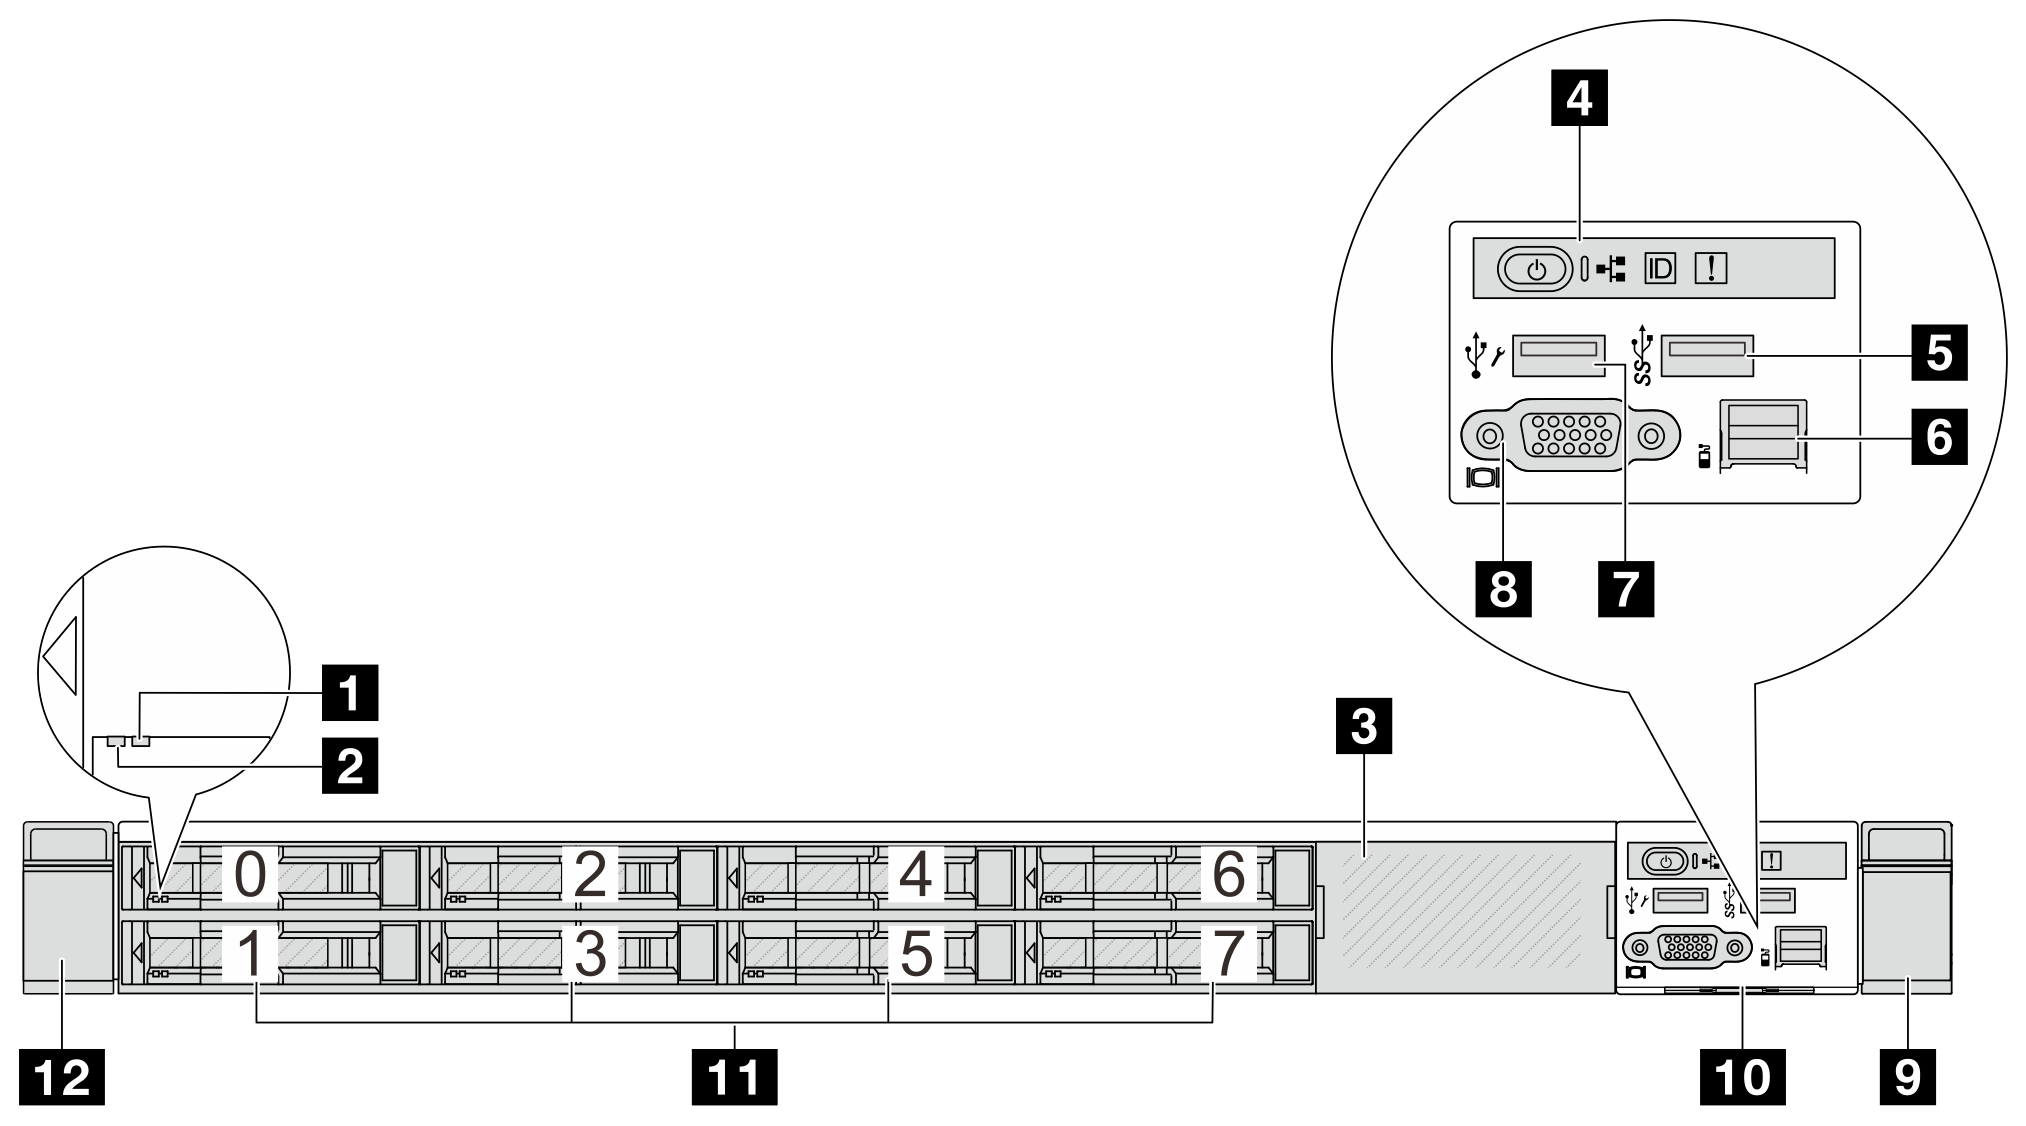 Front view of server model with eight 2.5'' drive bays